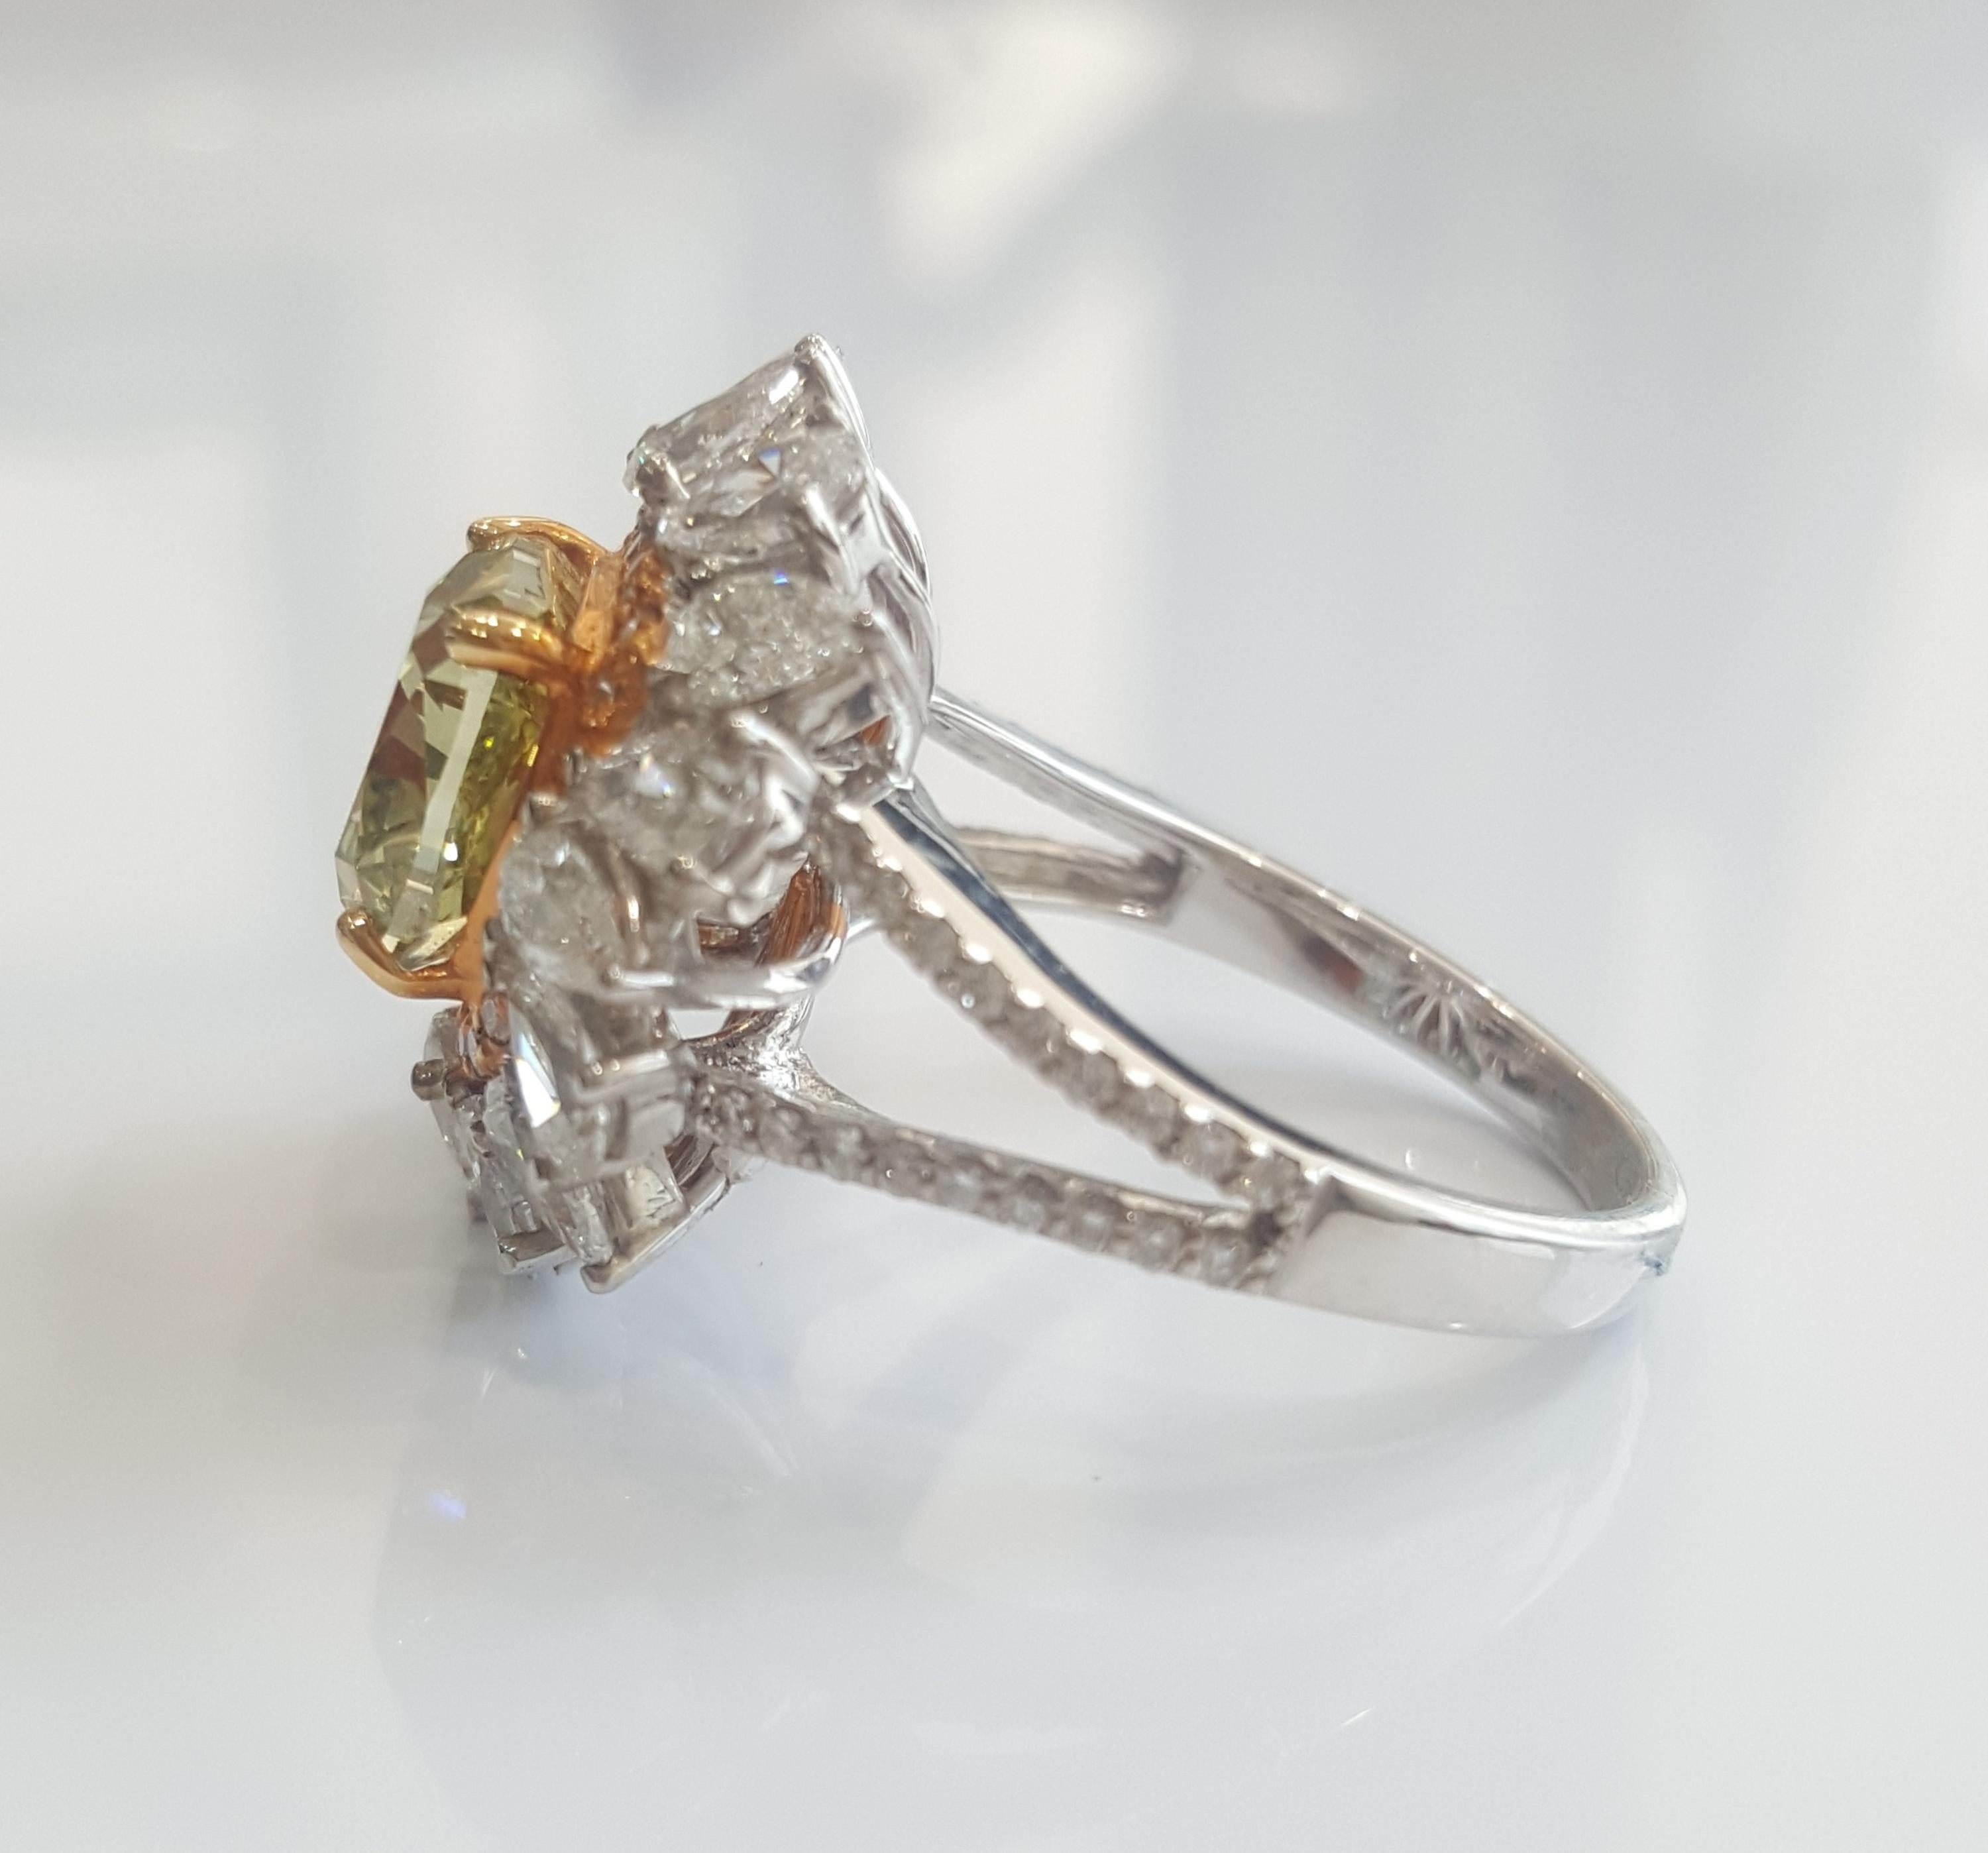 This beautiful ring features a GIA certified Natural Fancy Deep Green Yellow Cushion Brilliant weighing 3.02 carat with VS1 clarity, set in the center of this magnificently detailed ring encased in the white small round brilliant cut diamonds